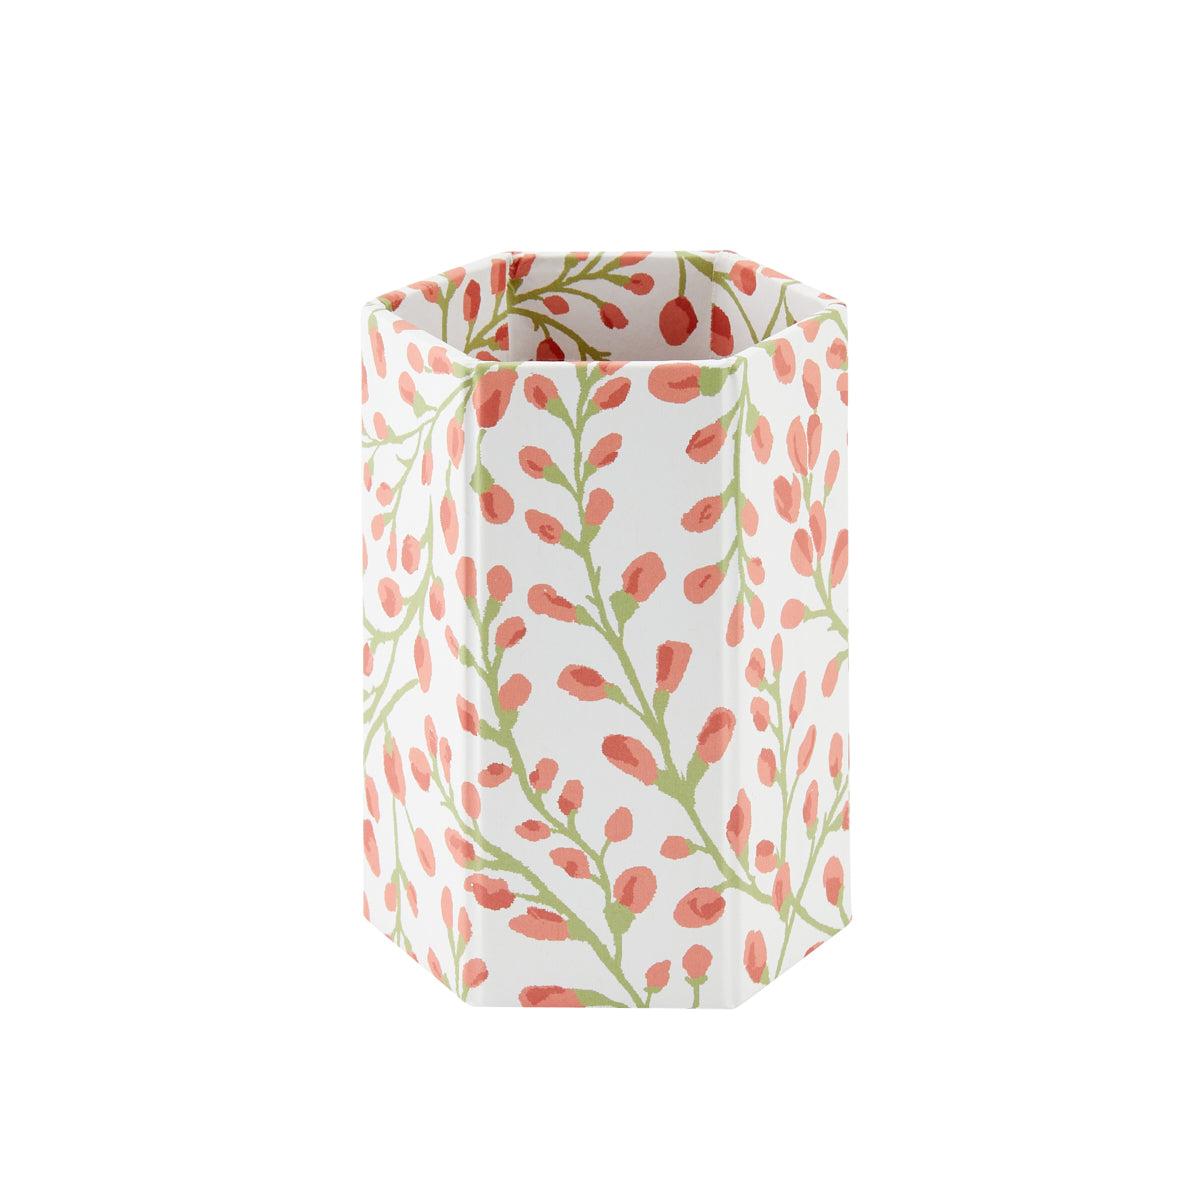 Nina Campbell Pen Pot All Over Buds - Coral